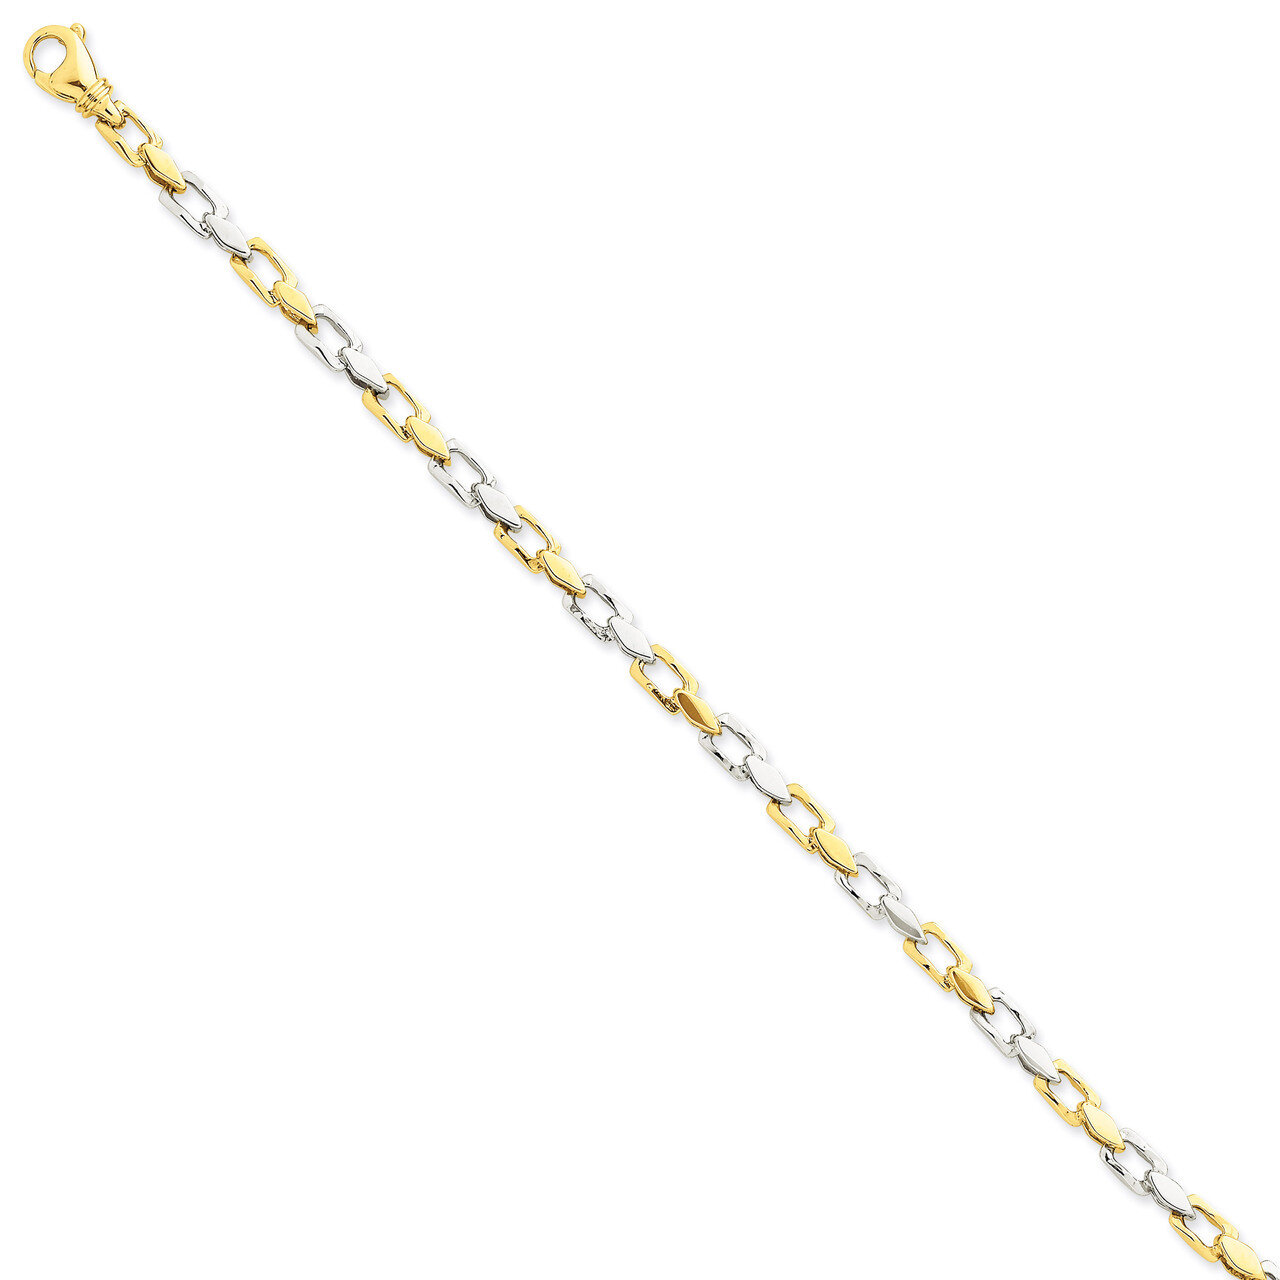 4.5mm Hand-Polished Fancy Link Chain 7 Inch 14k Two-Tone Gold LK305A-7